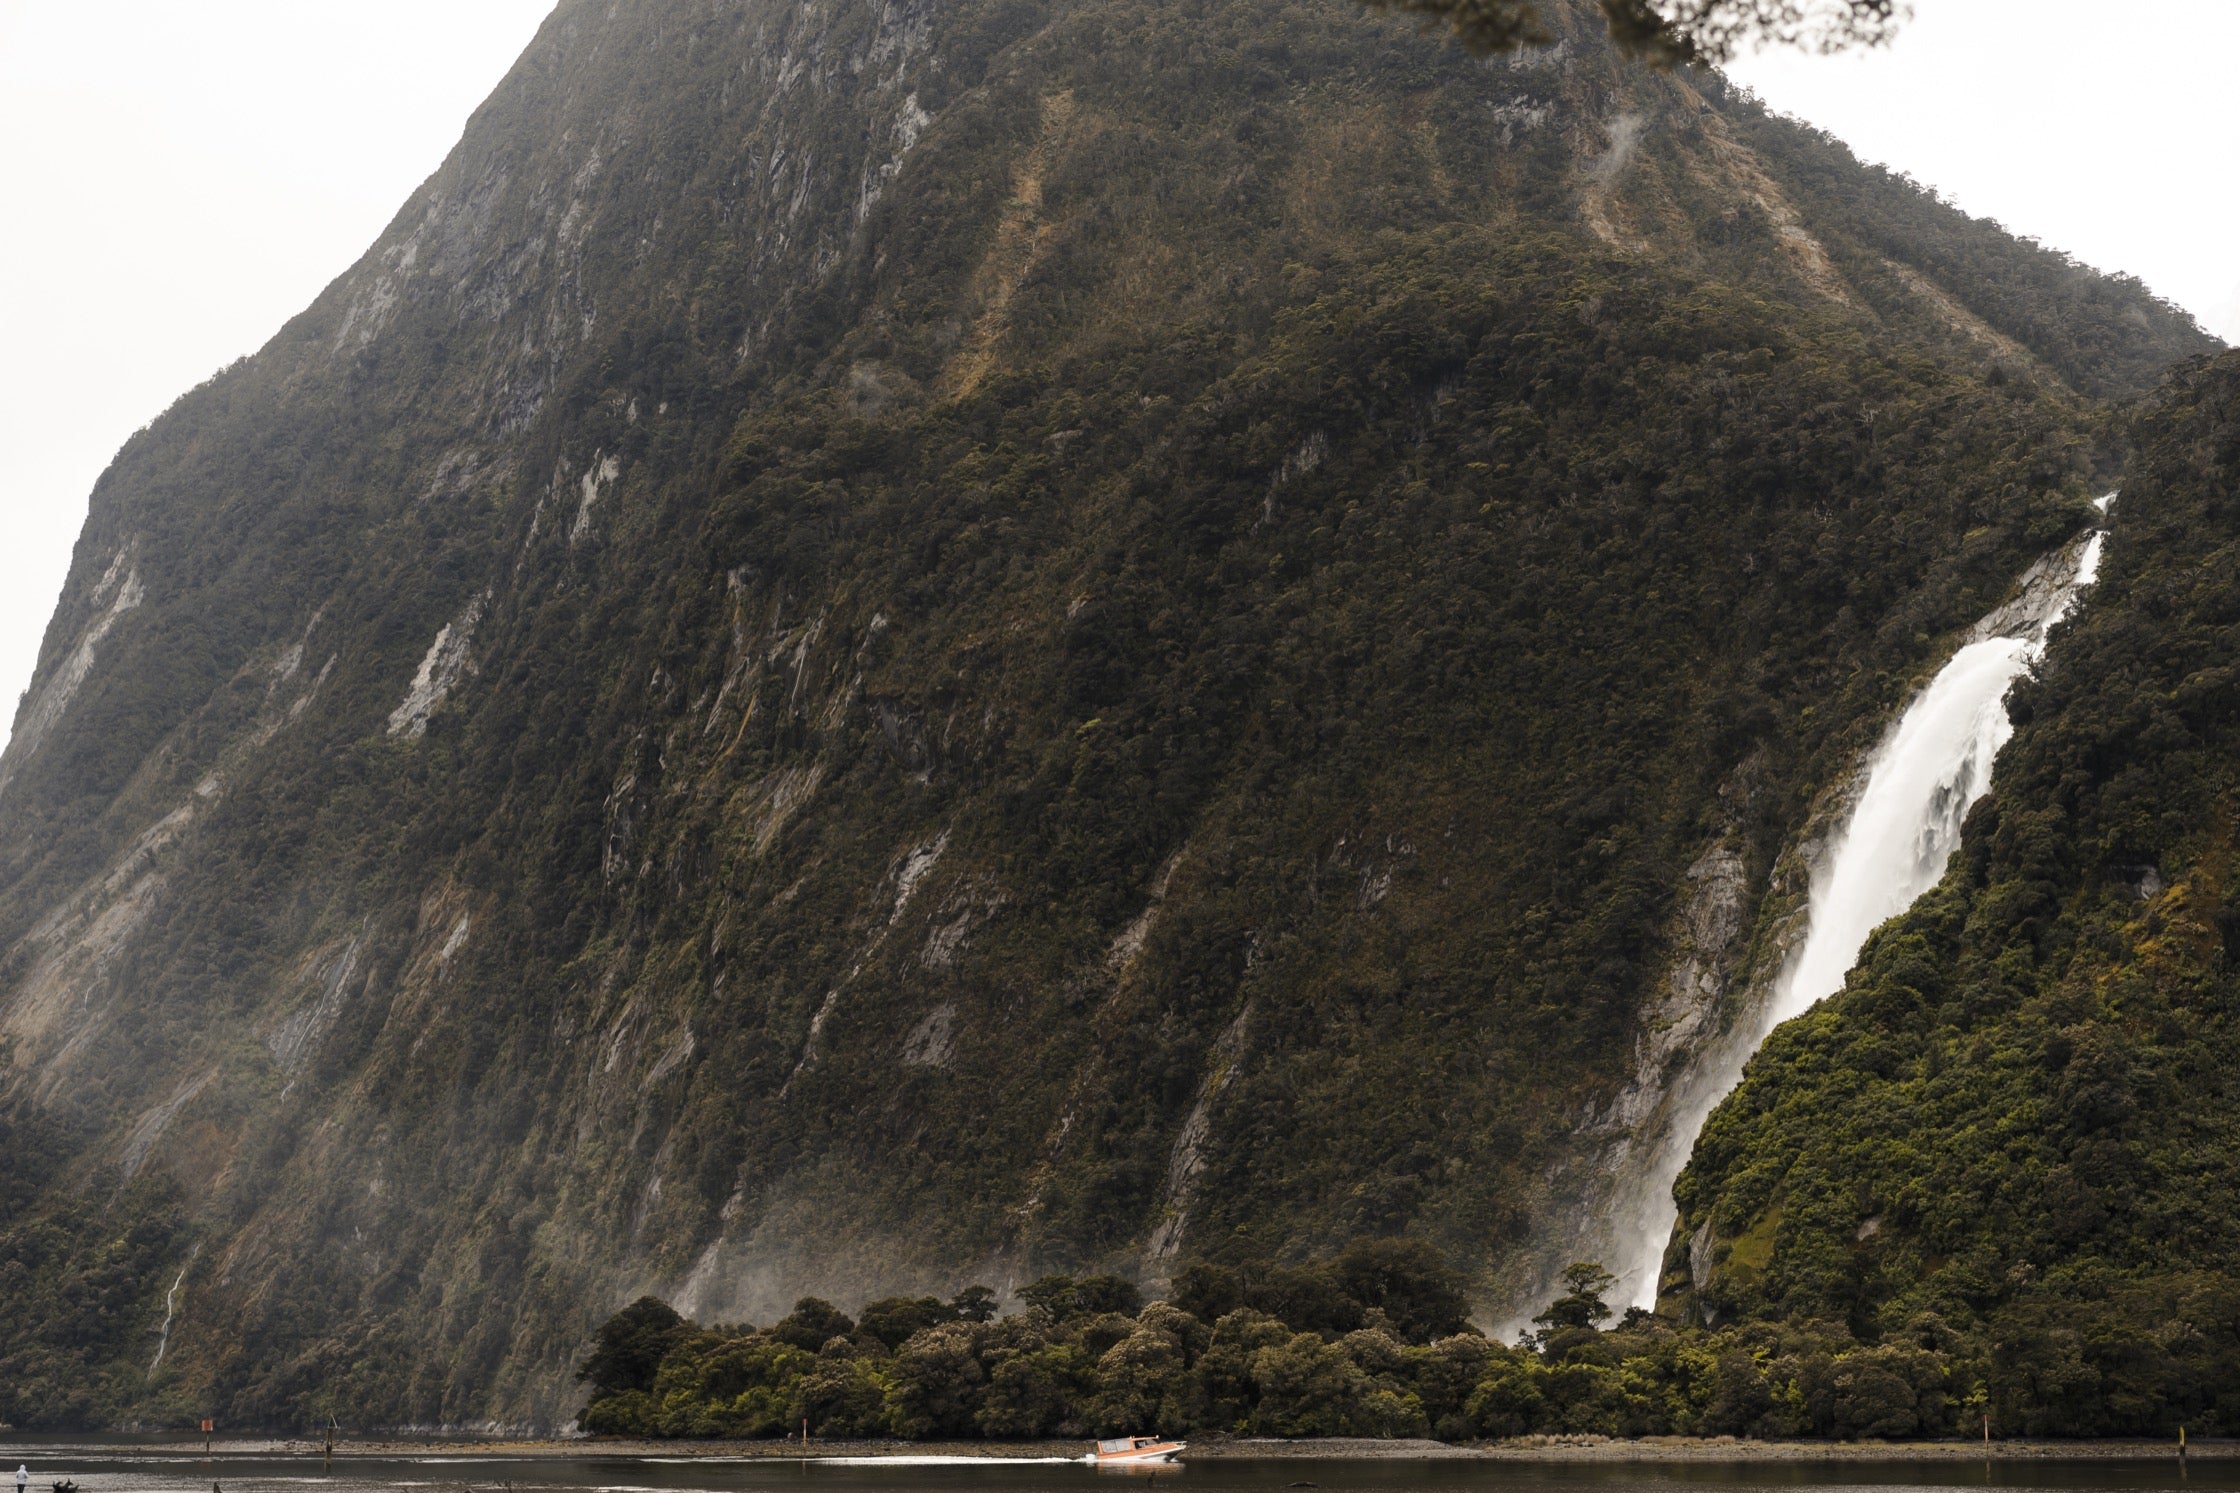 The Milford Sound waterfall. A small motorboat passes by in the water below.